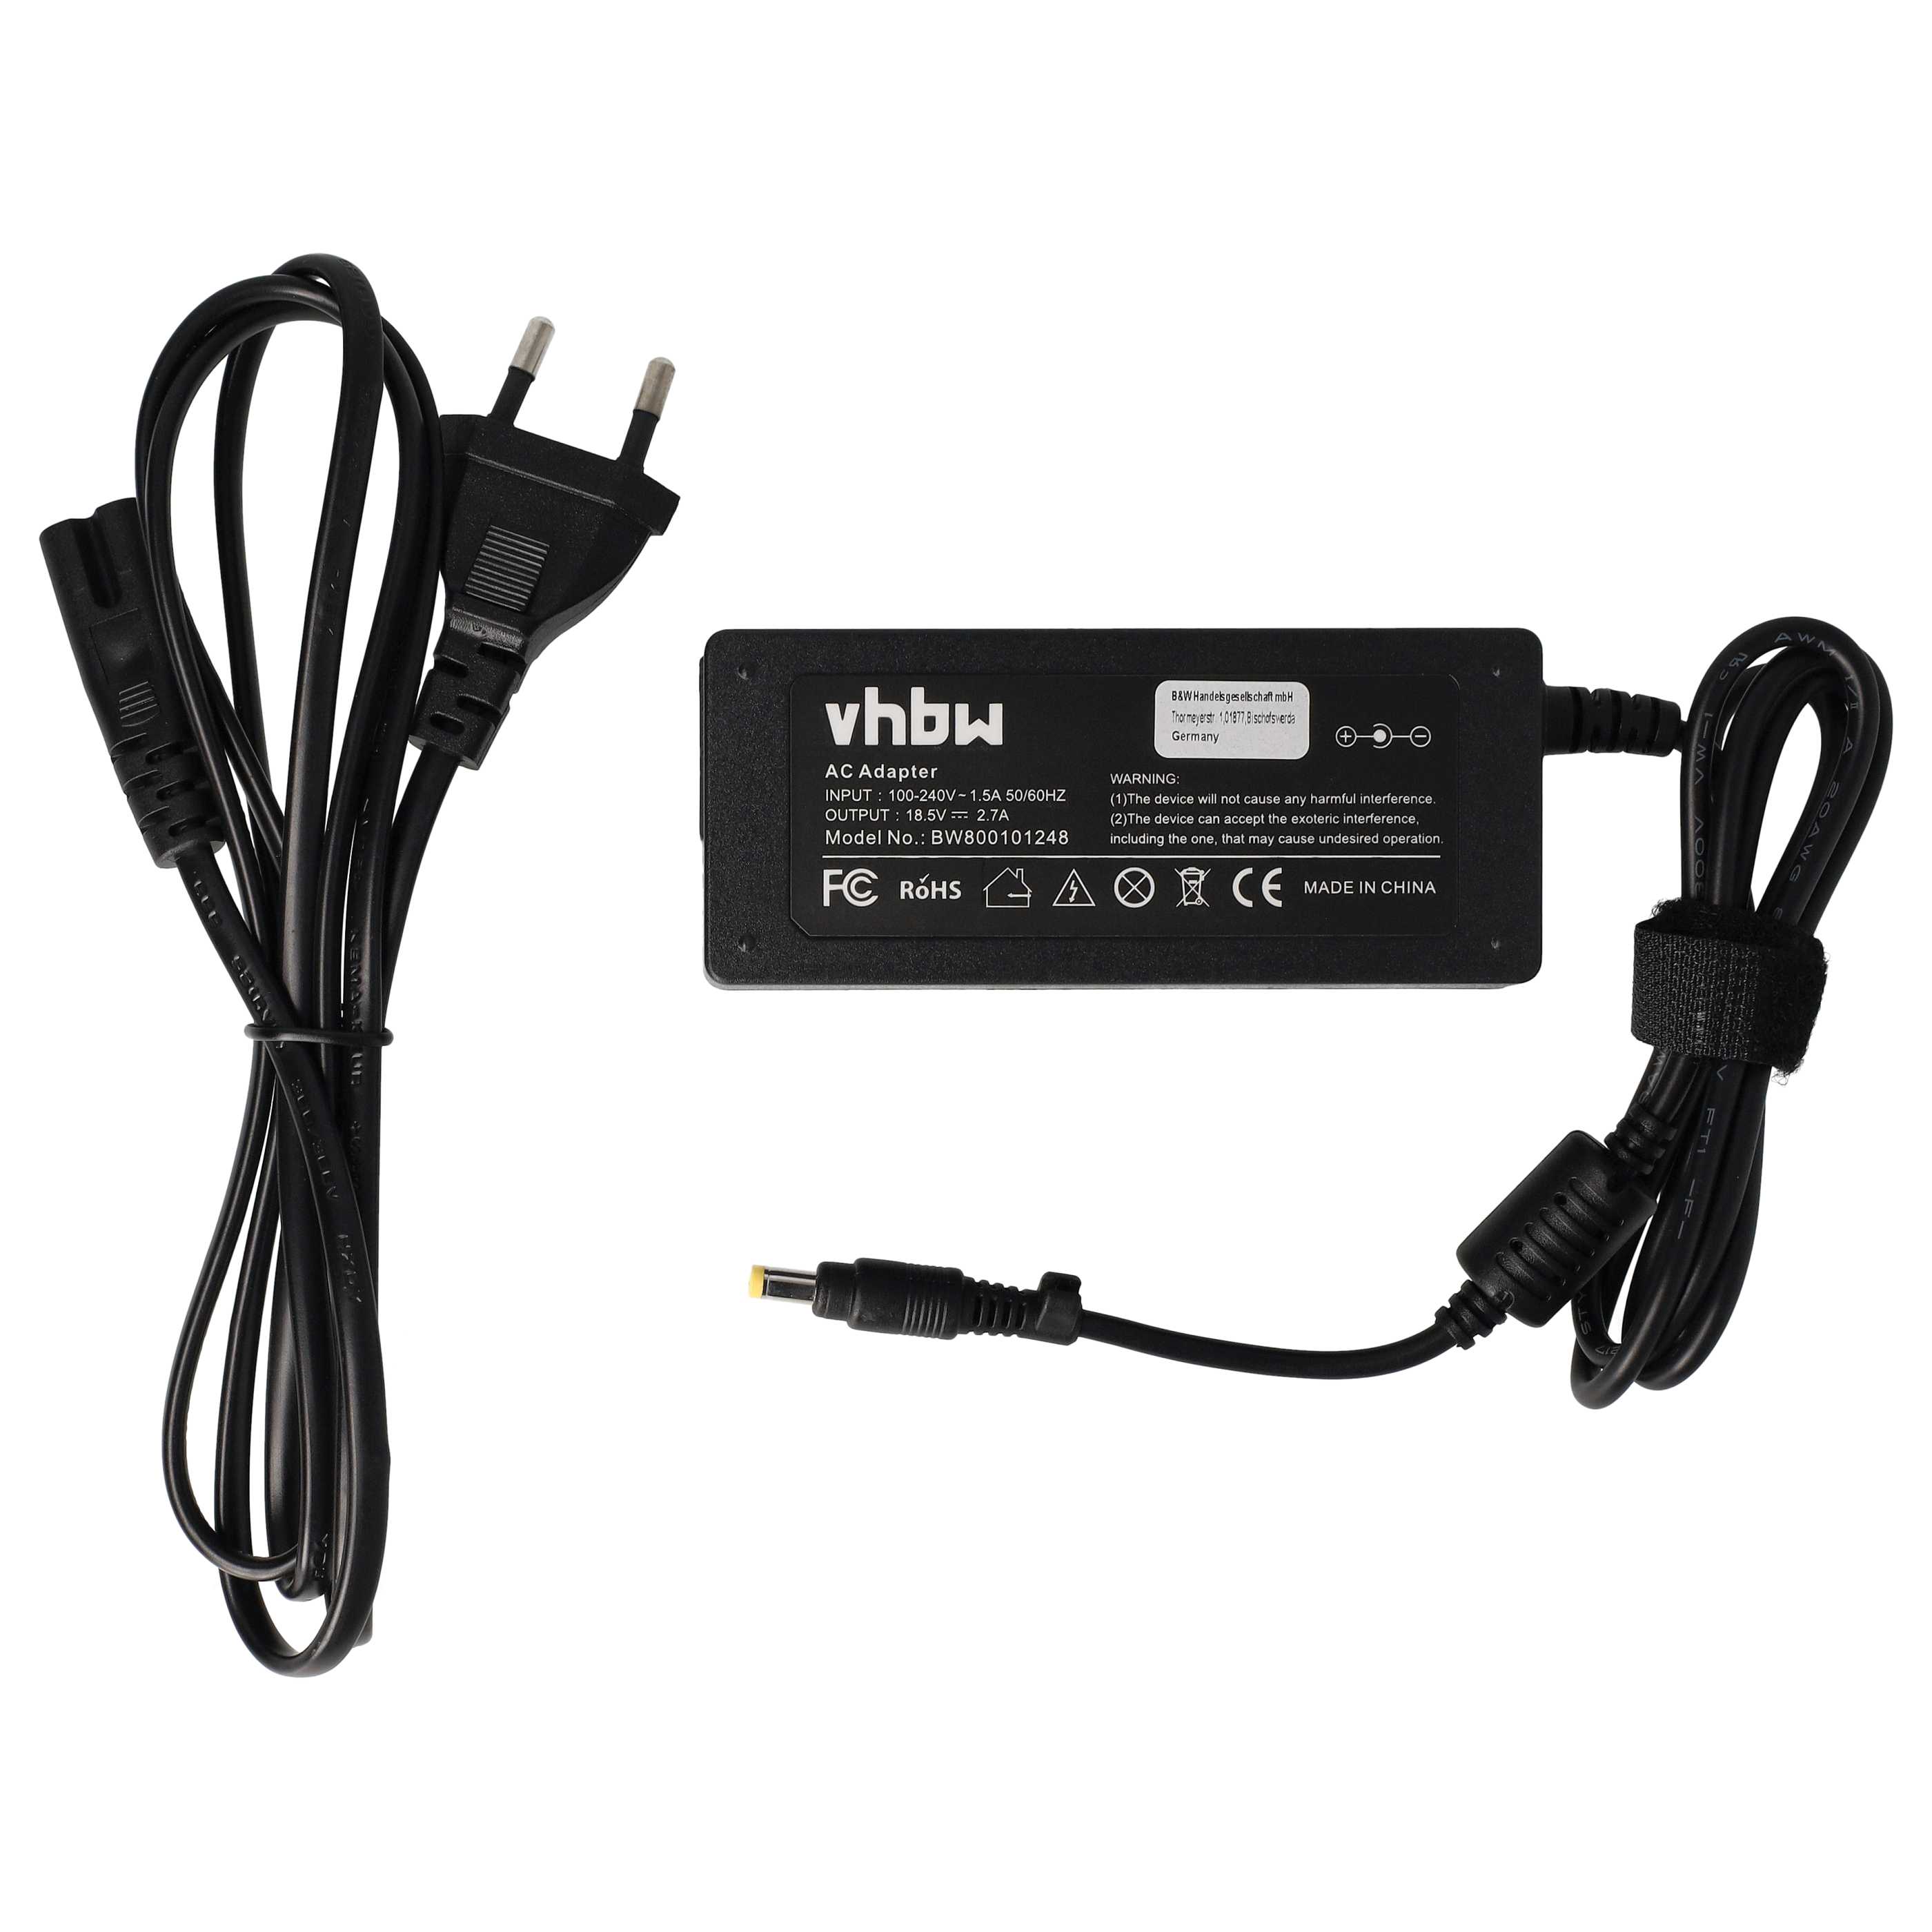 Mains Power Adapter replaces HP 239428-001, PPP012L, 239705-001 for HPNotebook etc., 50 W